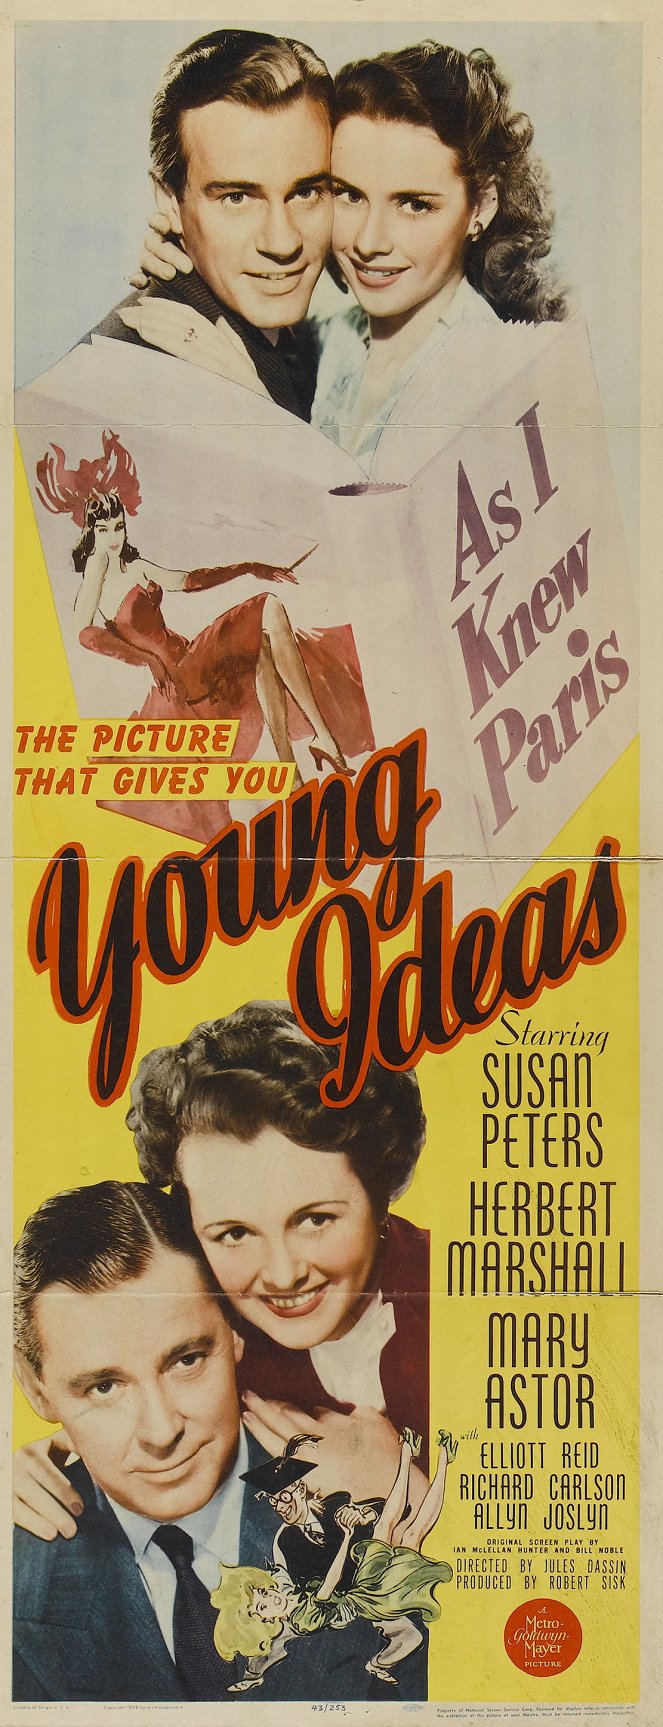 Young Ideas - Posters